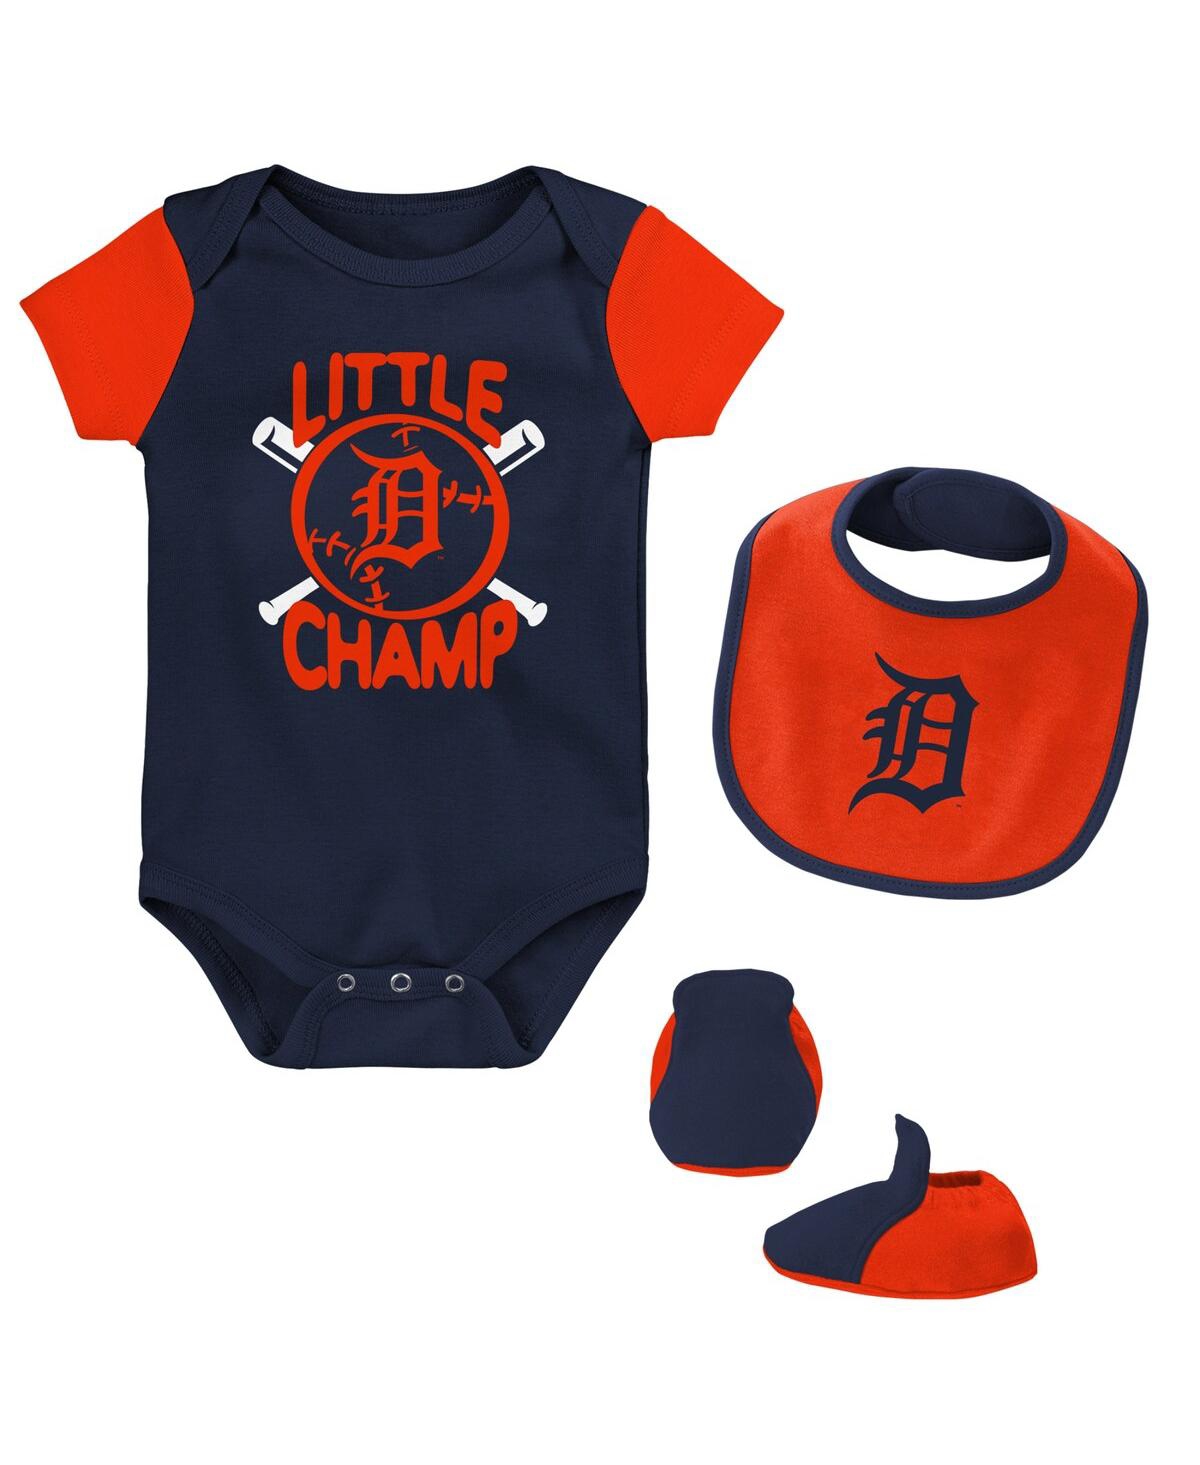 Outerstuff Babies' Newborn And Infant Boys And Girls Navy Detroit Tigers Little Champ Three-pack Bodysuit, Bib And Boot